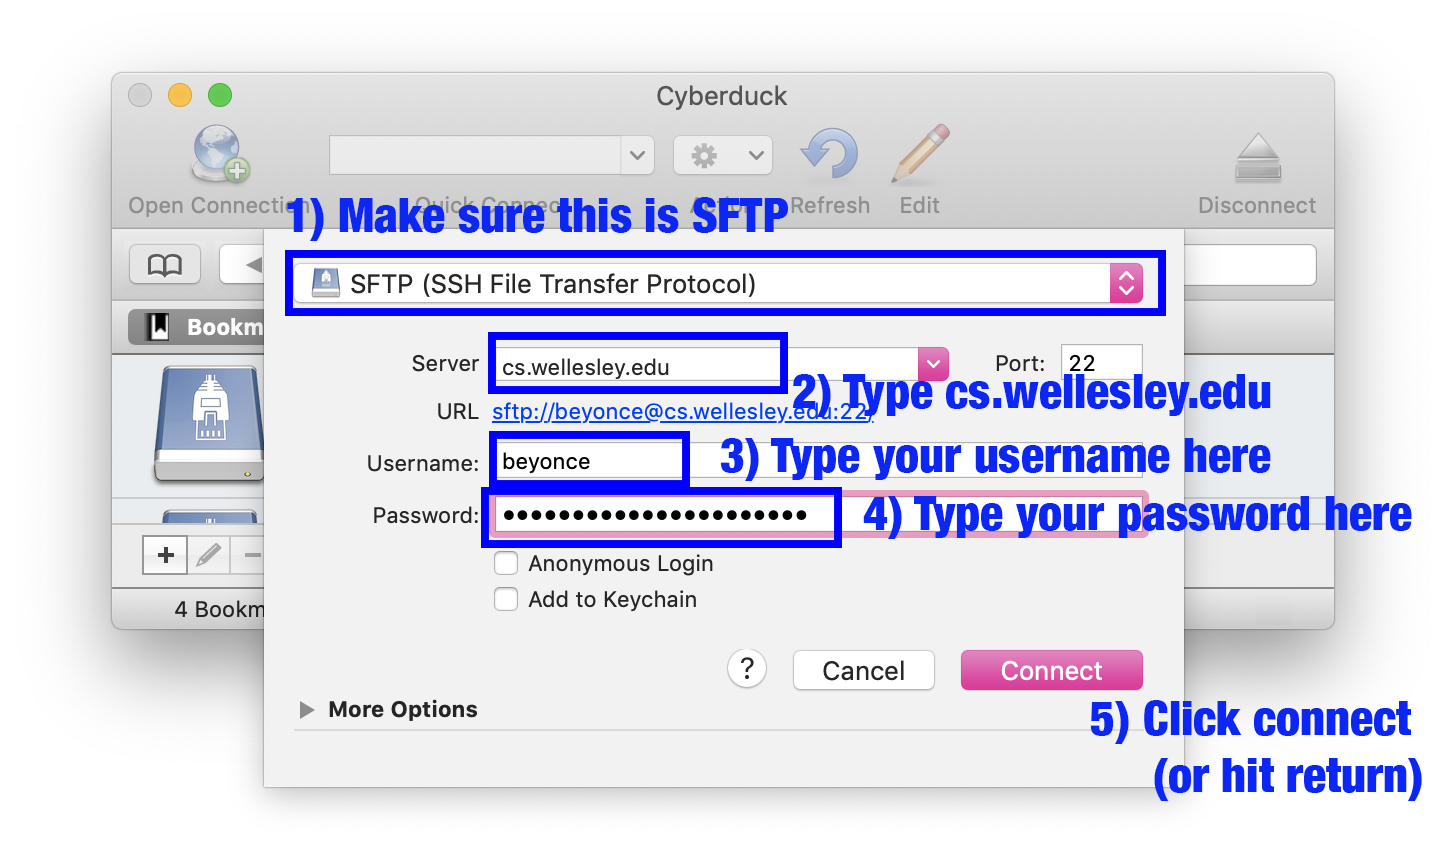 Instructions for the Open Connection dialog described above. 5 Steps: 1. Navigate to the Protocol selector at the top, and make sure that “SFTP (SSH File Transfer Protocol)” is selected. 2. Tab or navigate to the next input for Server, and type out “cs.wellesley.edu”. 3. Skip the Port input and the URL text, and navigate to the Username input; enter your CS account username (your Wellesley email without the “@wellesley.edu” part). 4. Navigate to the next input for Password, and enter your CS account password (NOT your main Wellesley password). 5. Navigate to the Connect button near the end of the form, and activate it to open the connection, or just press Enter.